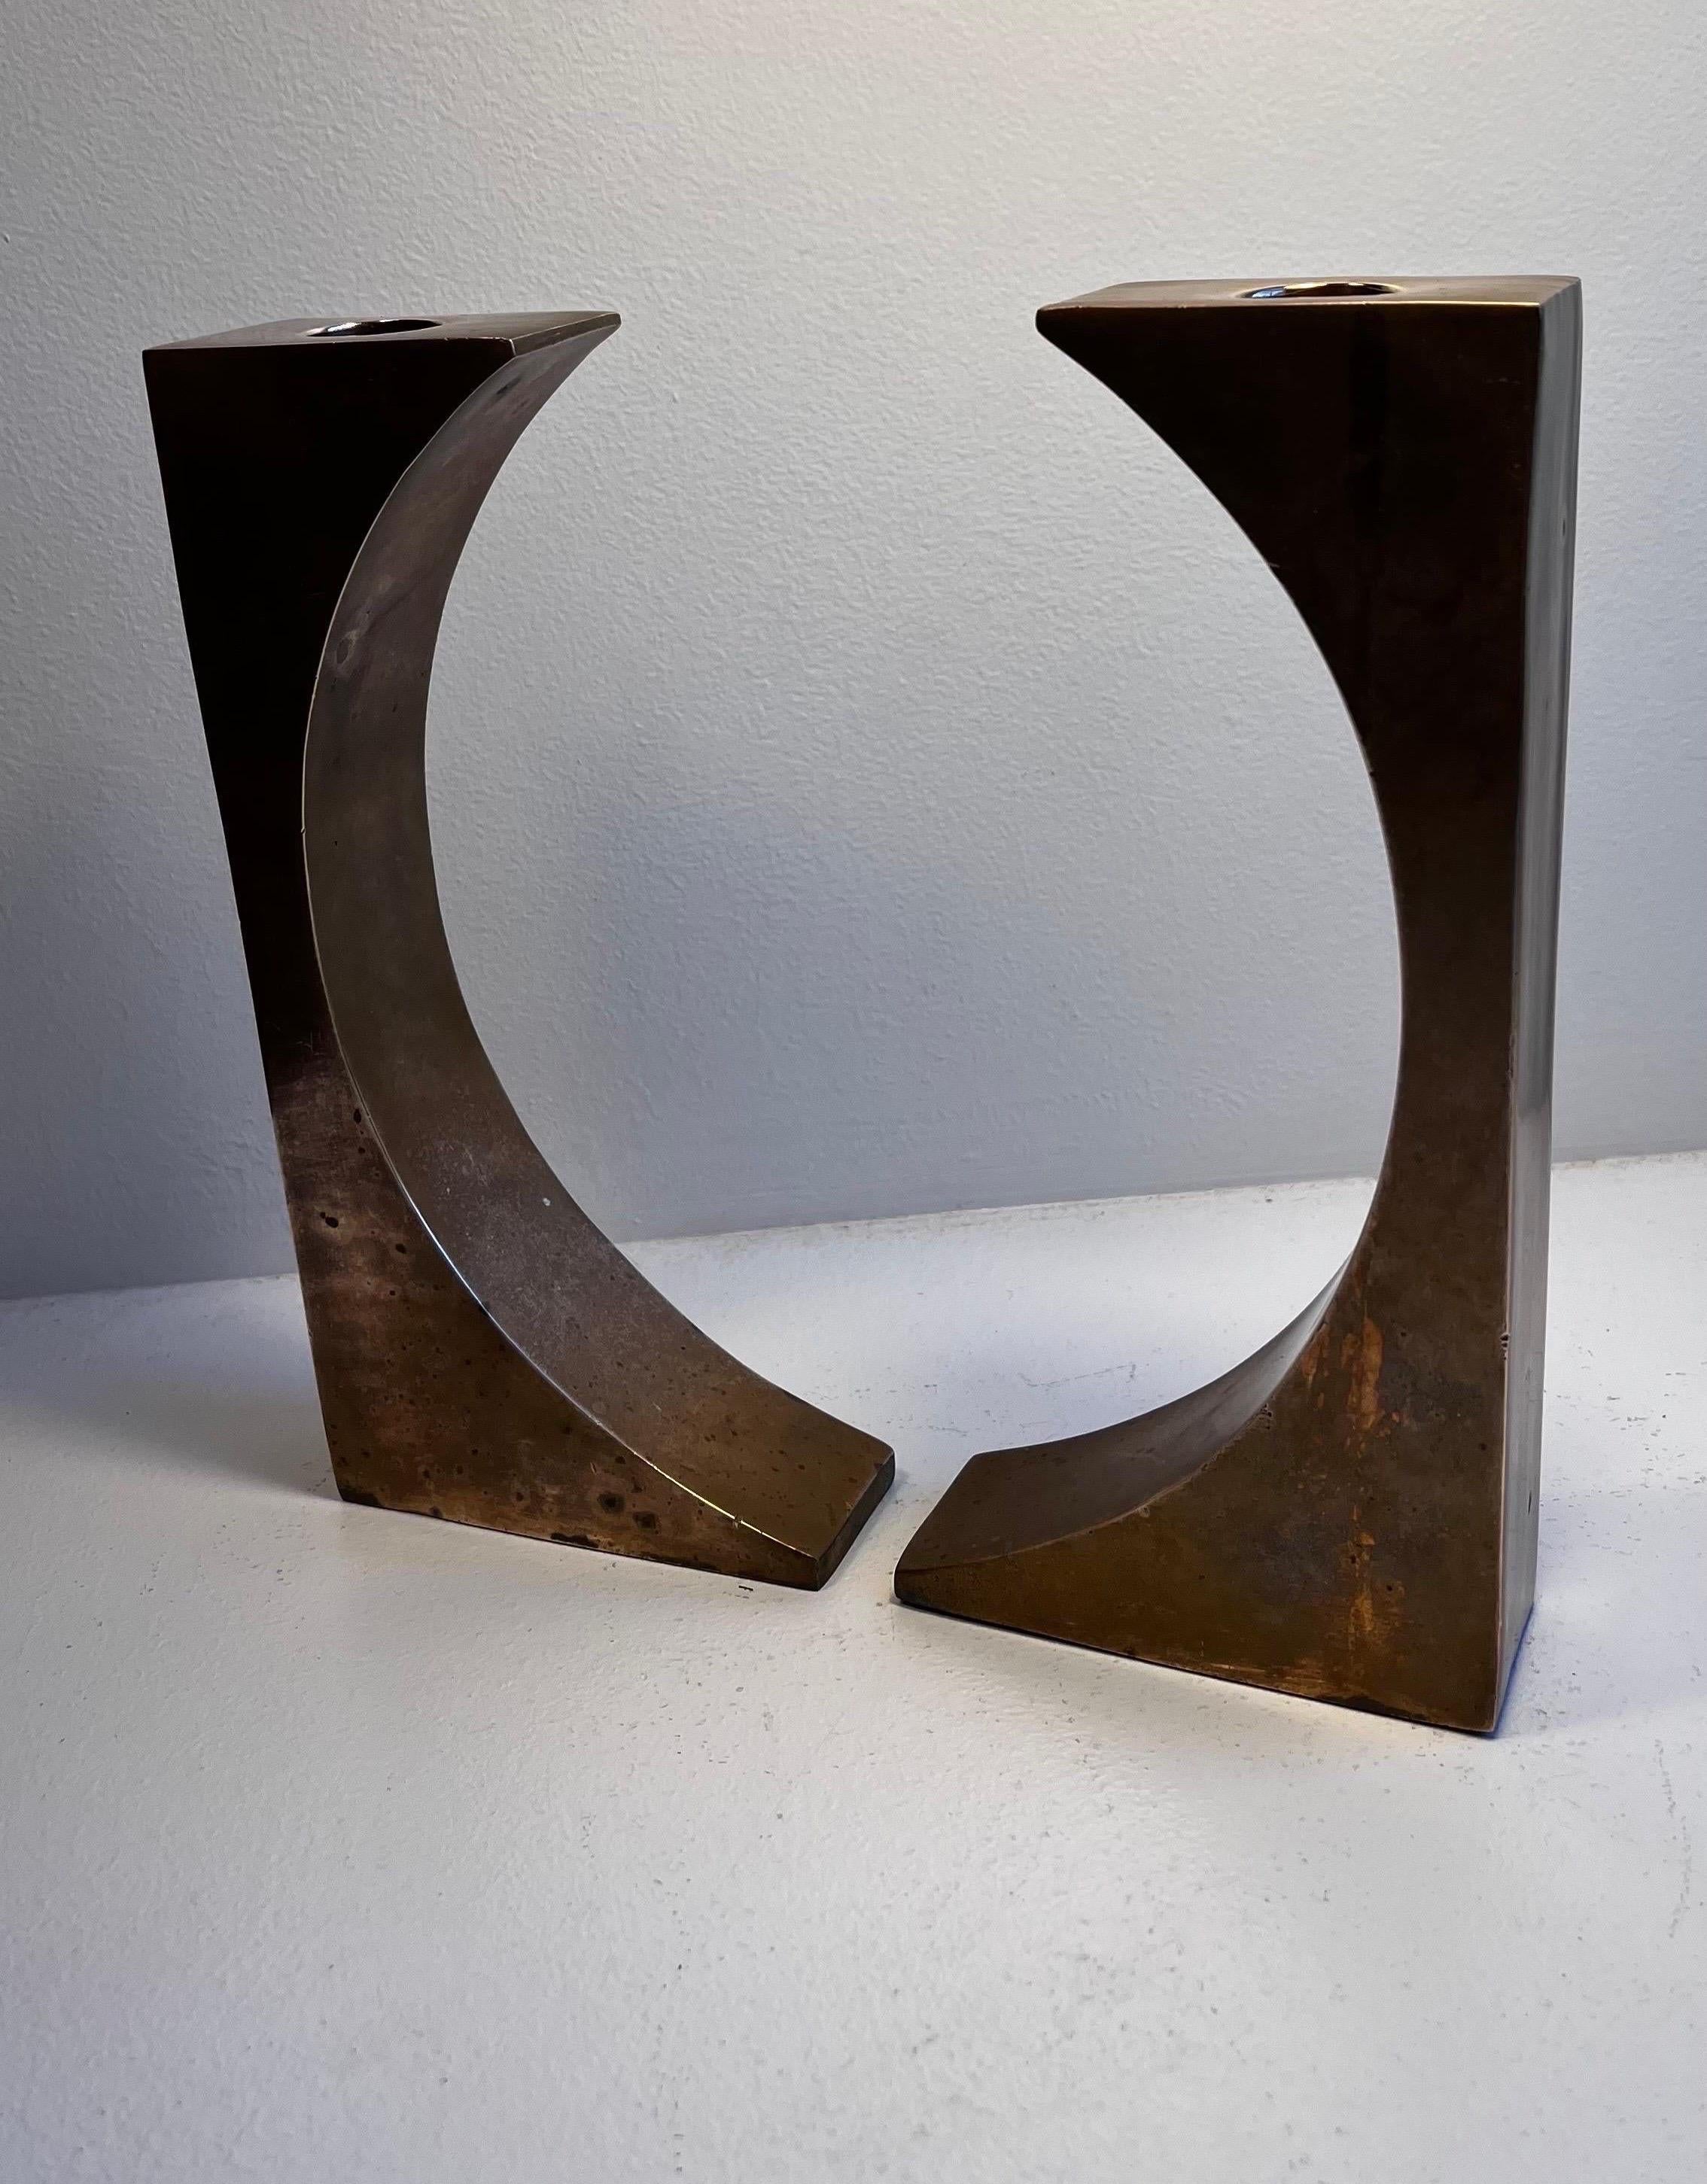 Cast Pair of  Bronze Candlesticks or Bookends in the style M. Gerber, c 1970 For Sale